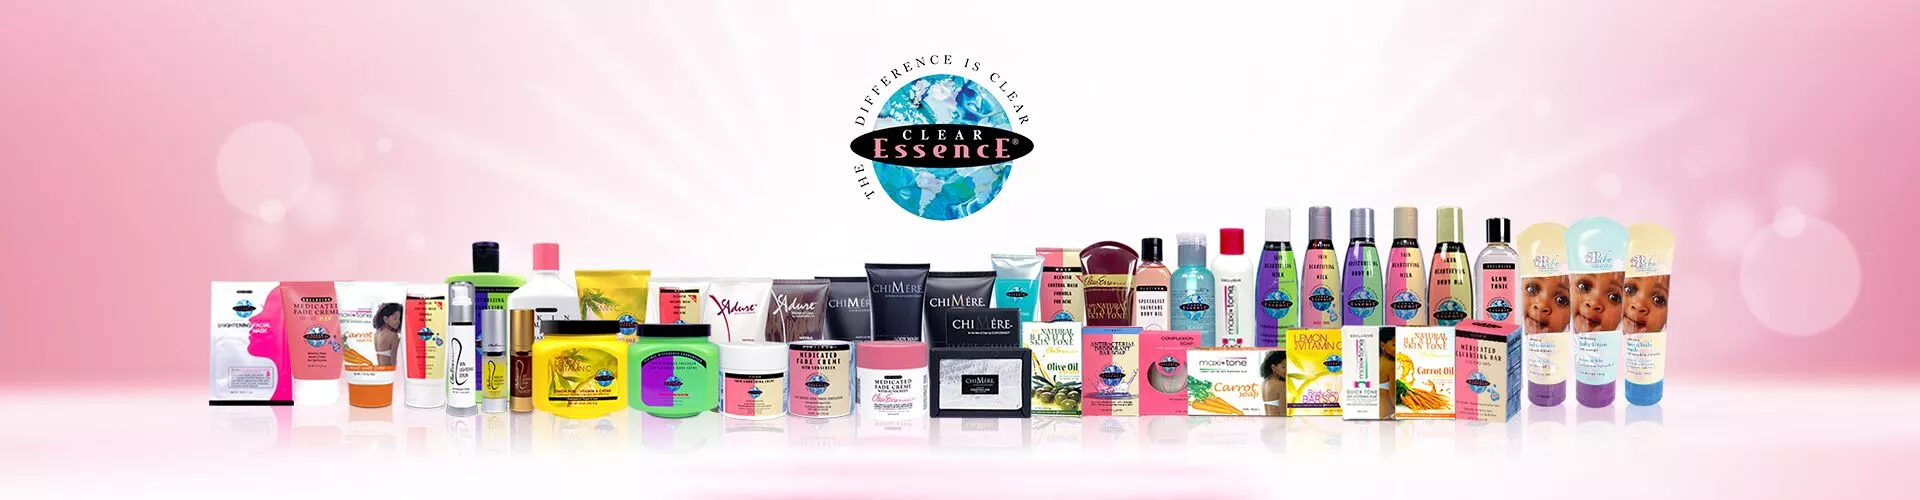 Clear Essence Product Family